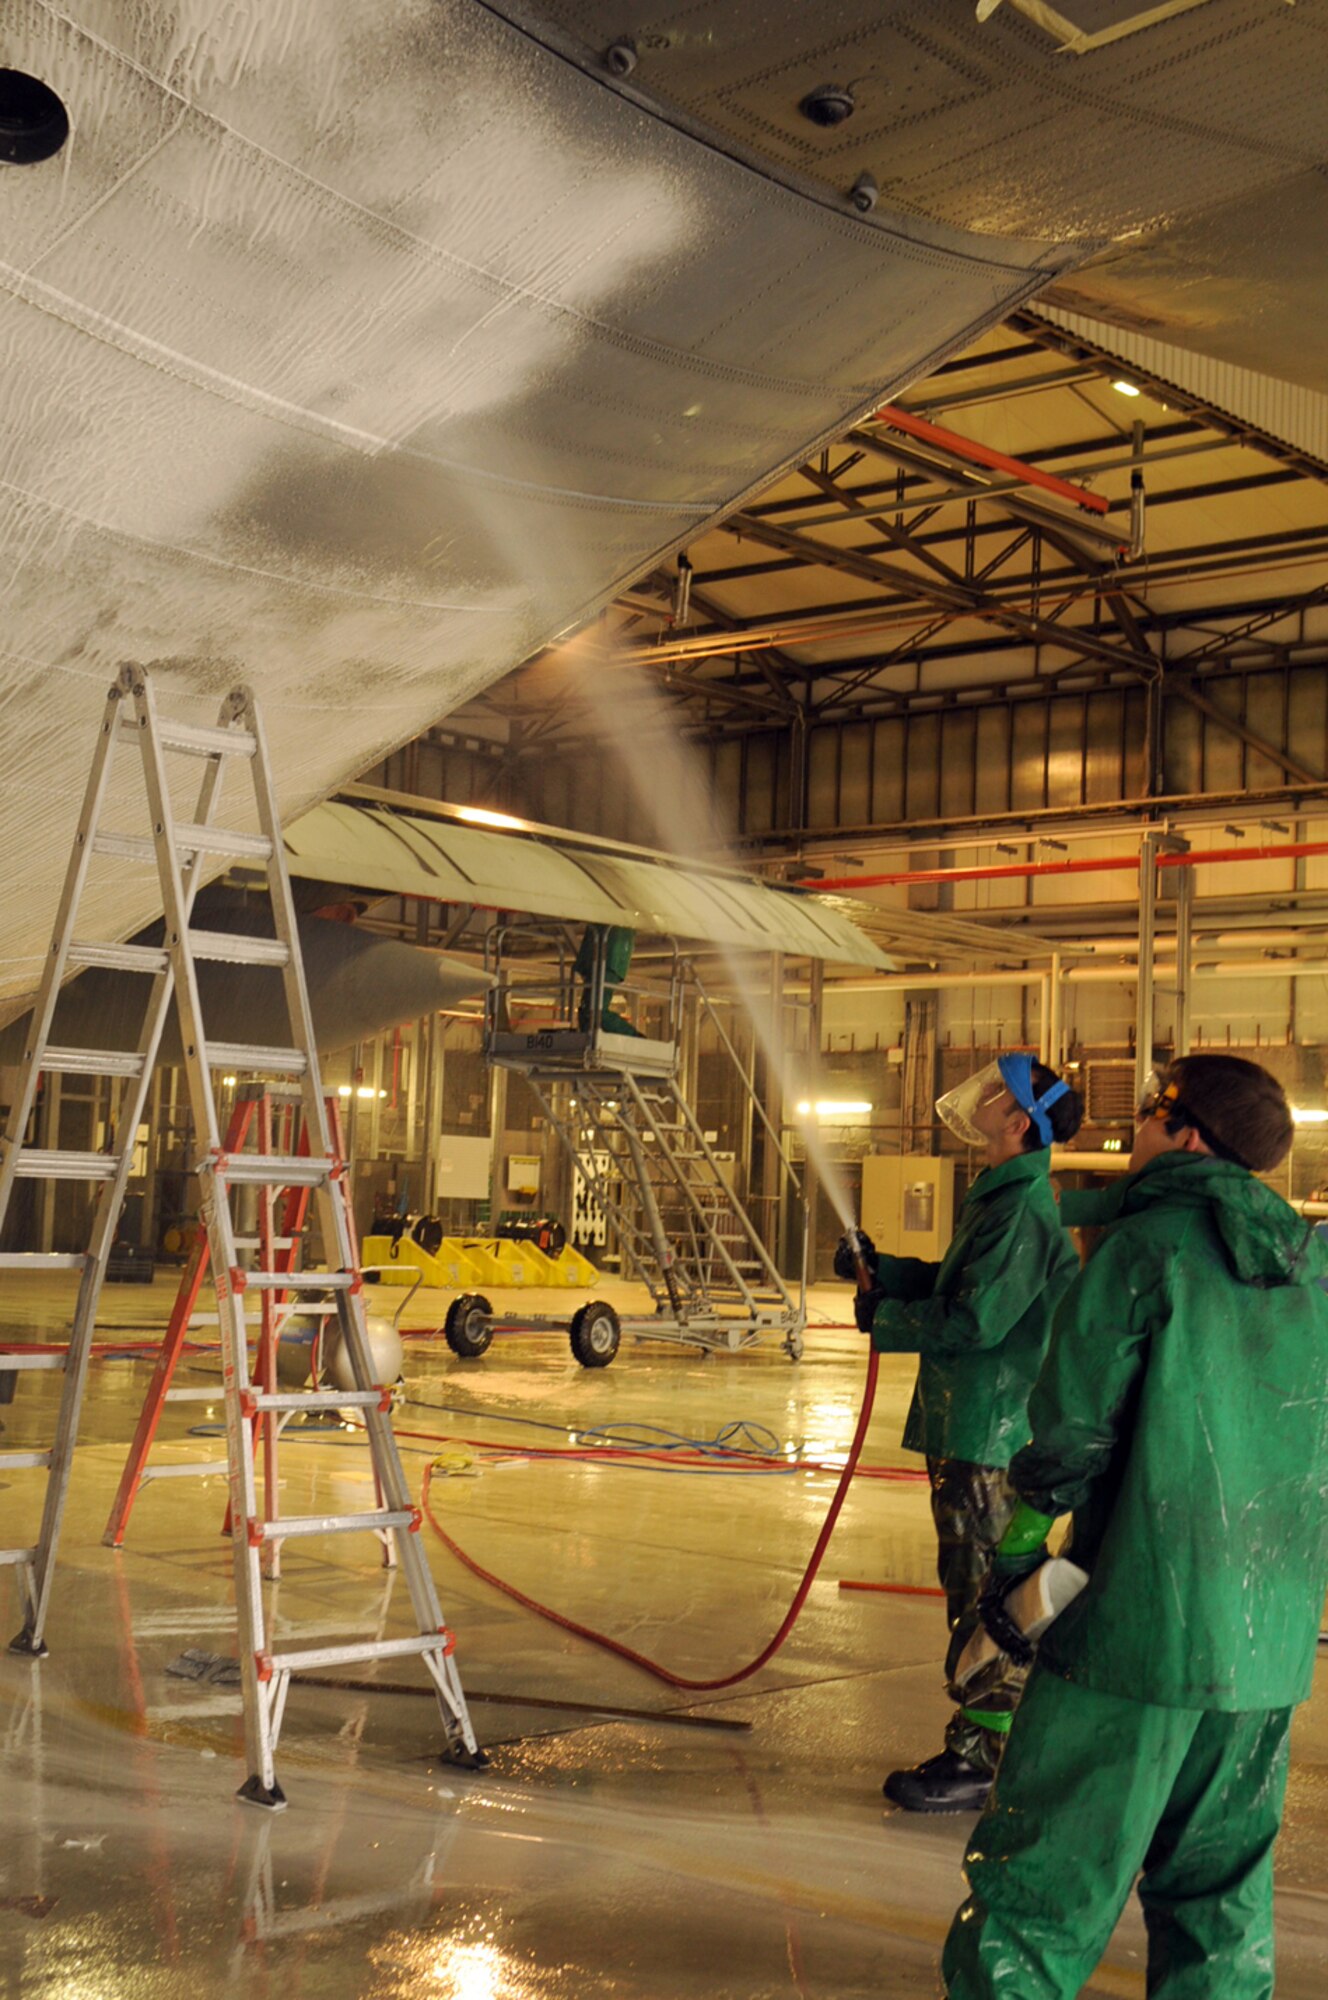 Members from the 86th Aircraft Maintenance Squadron spray a C-130E Hercules with foam to assist with the cleaning process in Hangar 1, Ramstein Air Base, Germany, Oct. 28, 2008. The wash crew is made up of a 12-member team from the 86th AMXS who wash aircraft every 90 days to keep them mission ready. (U.S. Air Force photo by Airman 1st Class Scott Saldukas)